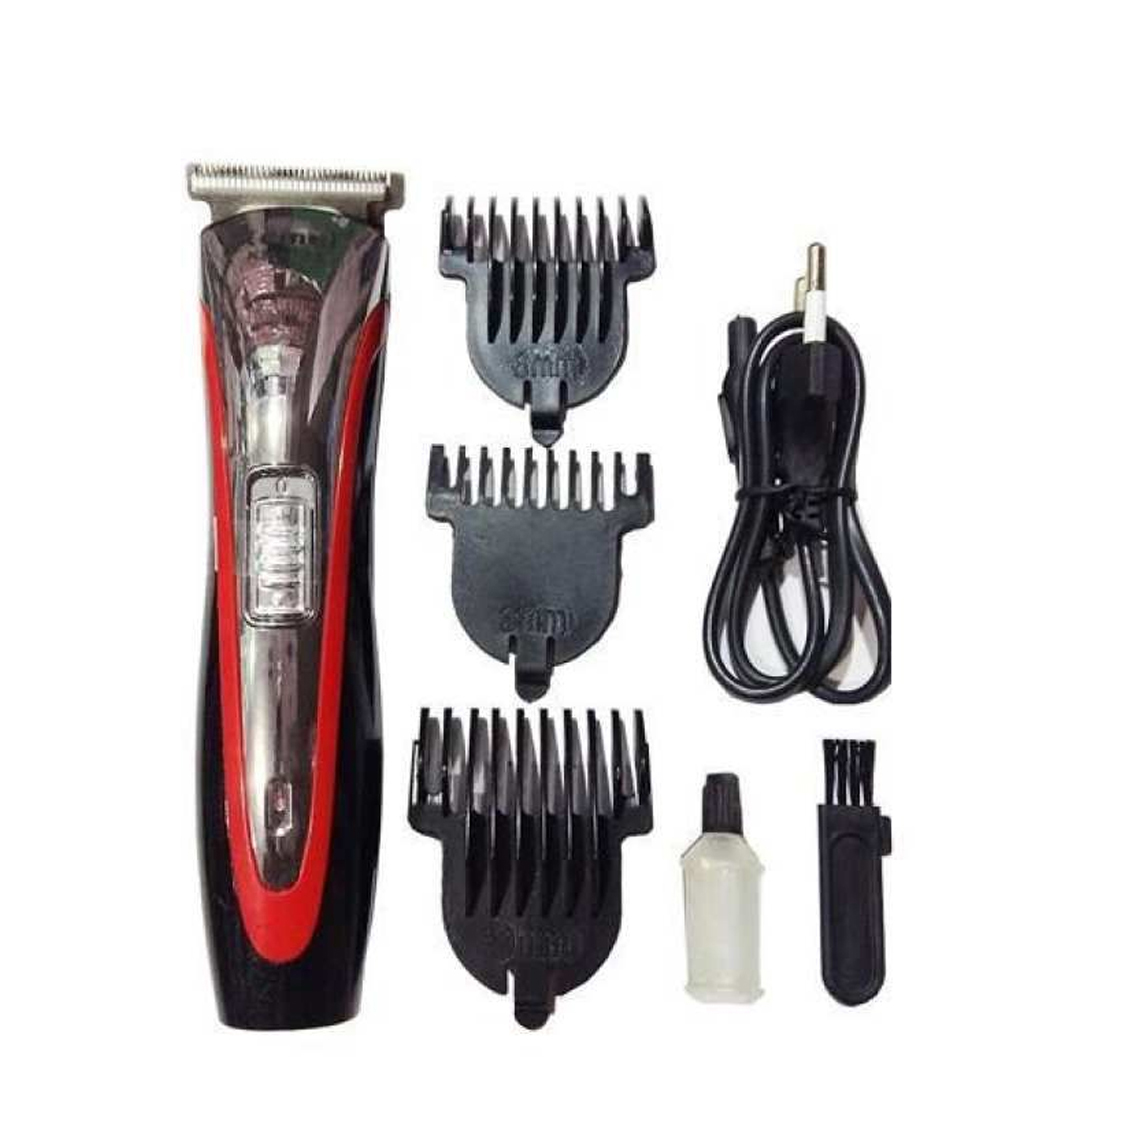 electric razor for pubic hair removal